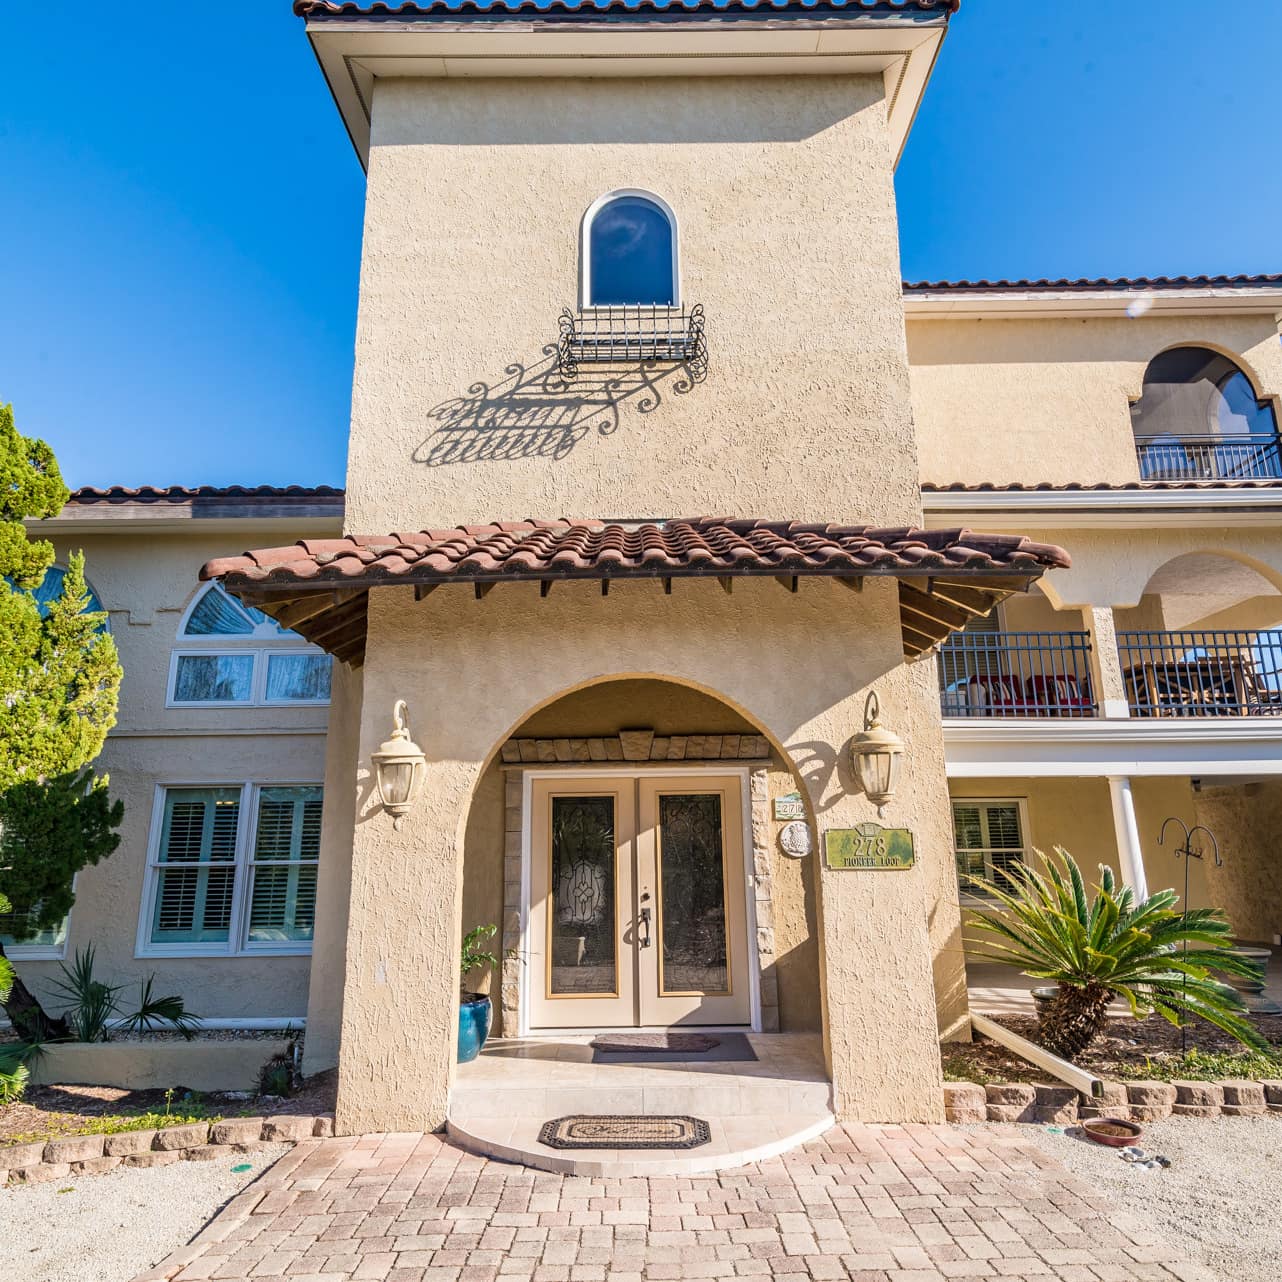 A stucco-finished home in the Spanish style with a shaded porch and colonnaded al fresco balconies